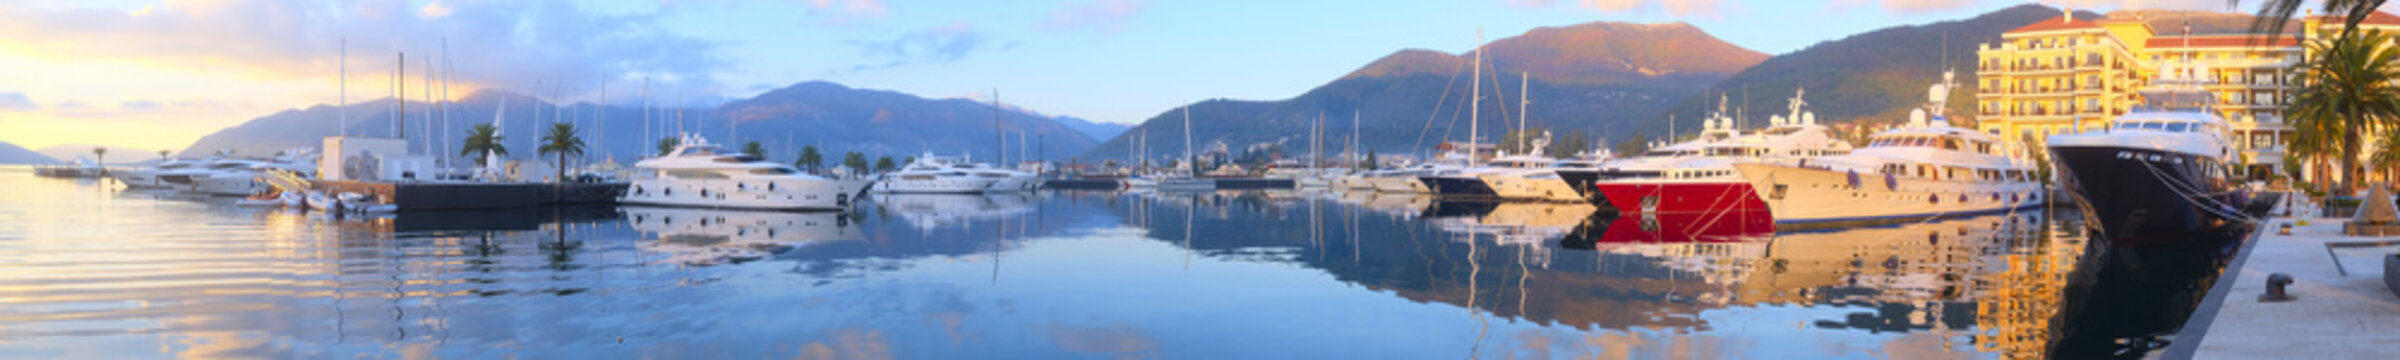 Panorama with the image of a Tivat harbour